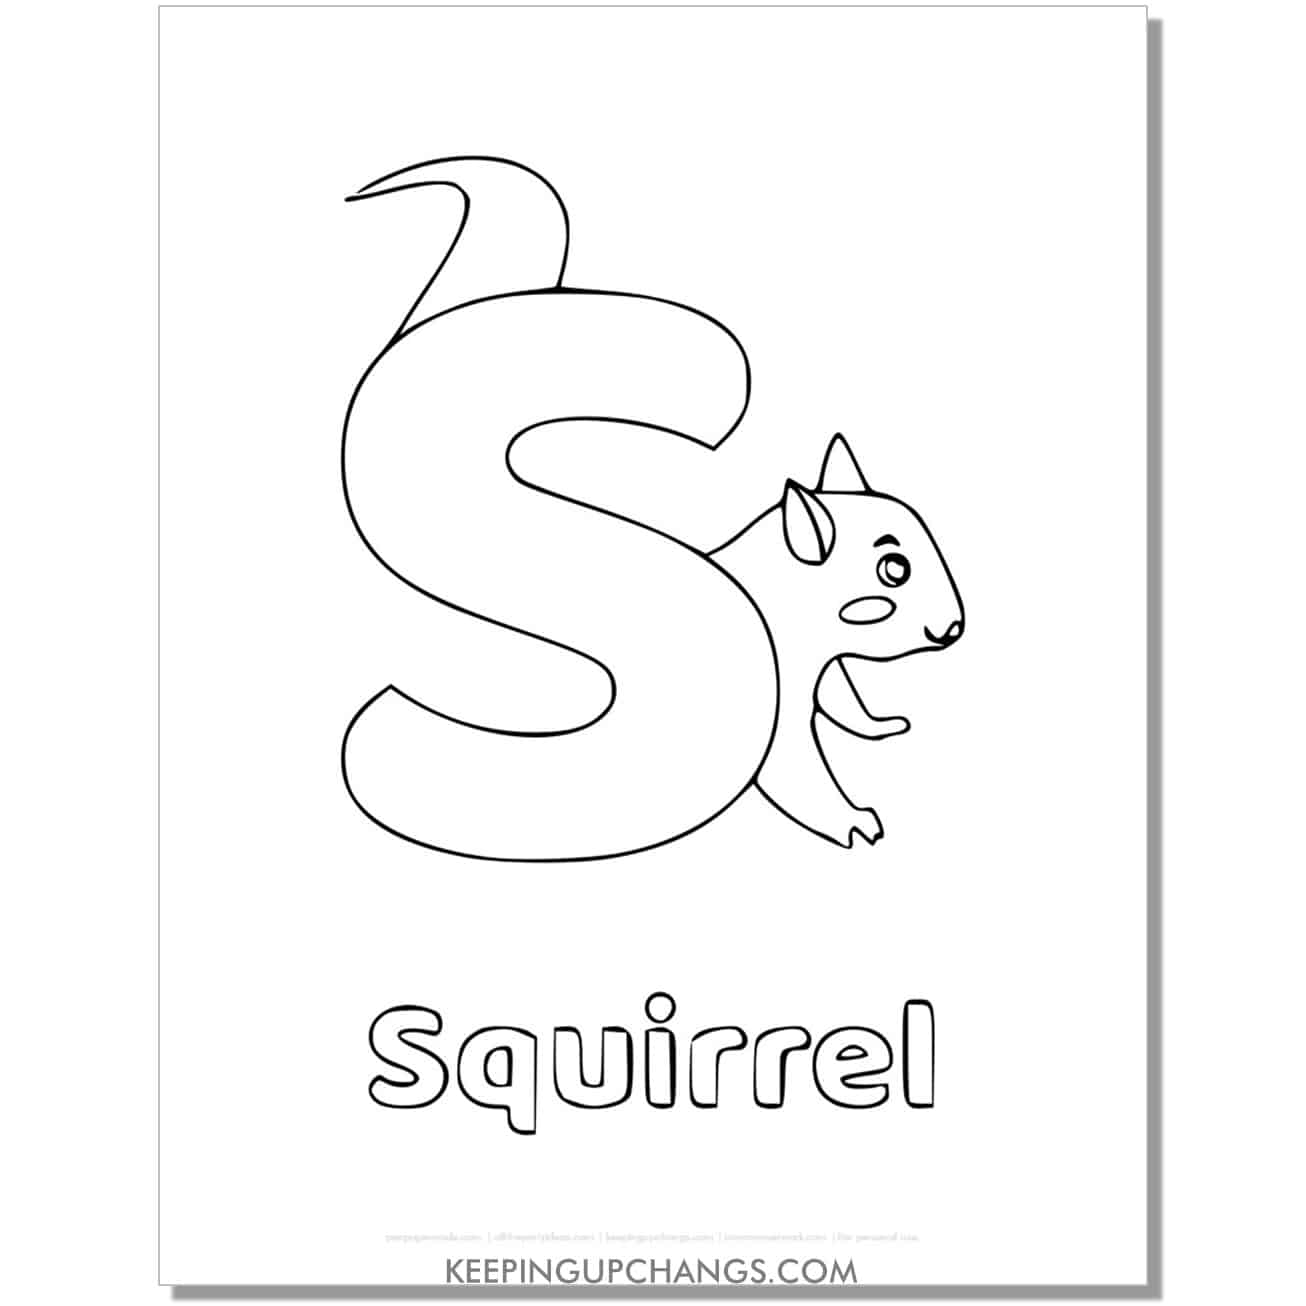 alphabet s coloring worksheet with squirrel.